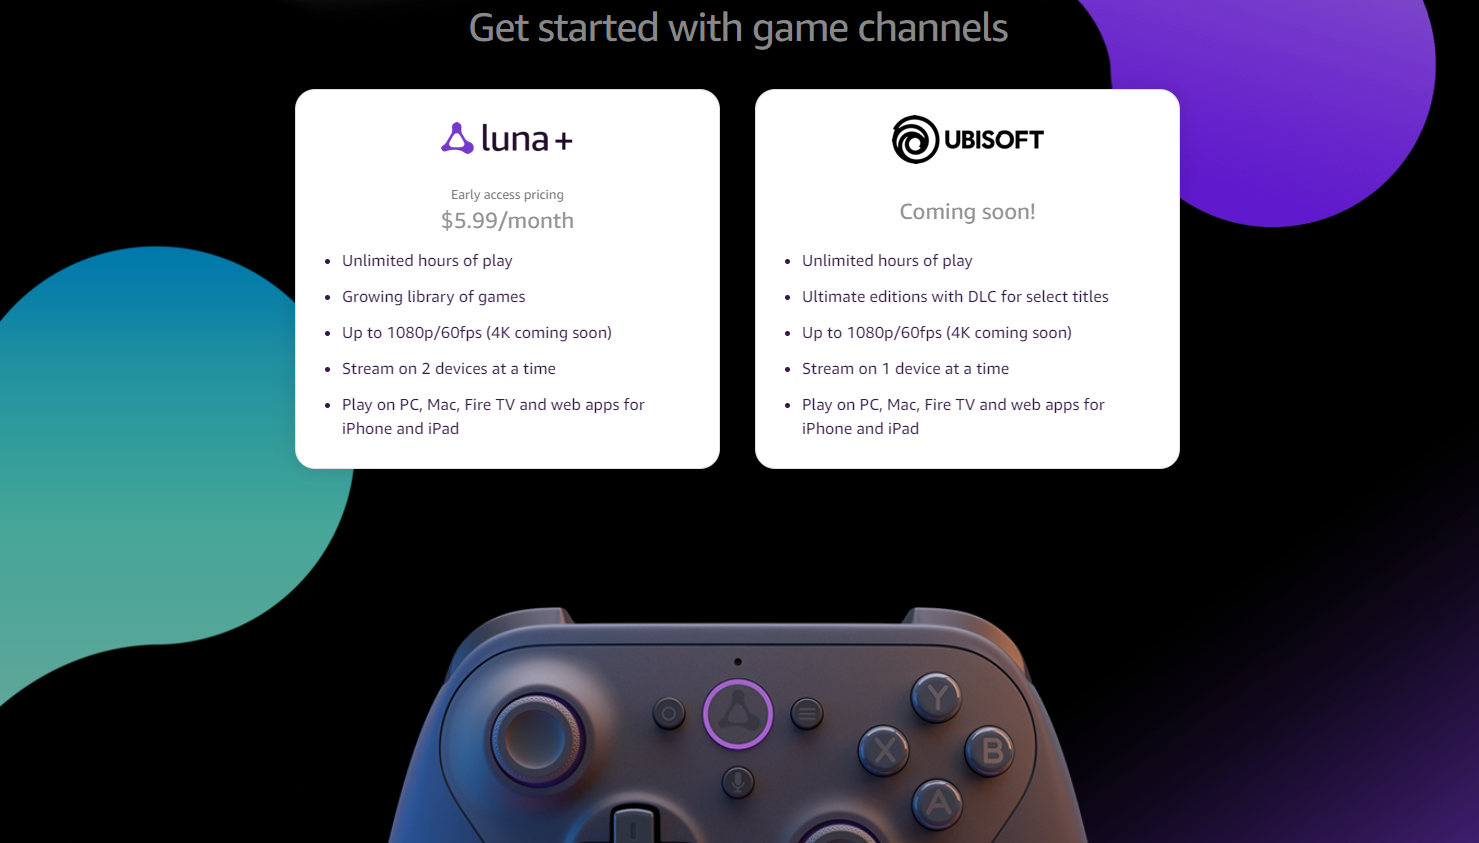 Prime members to get access to 's game streaming service Luna